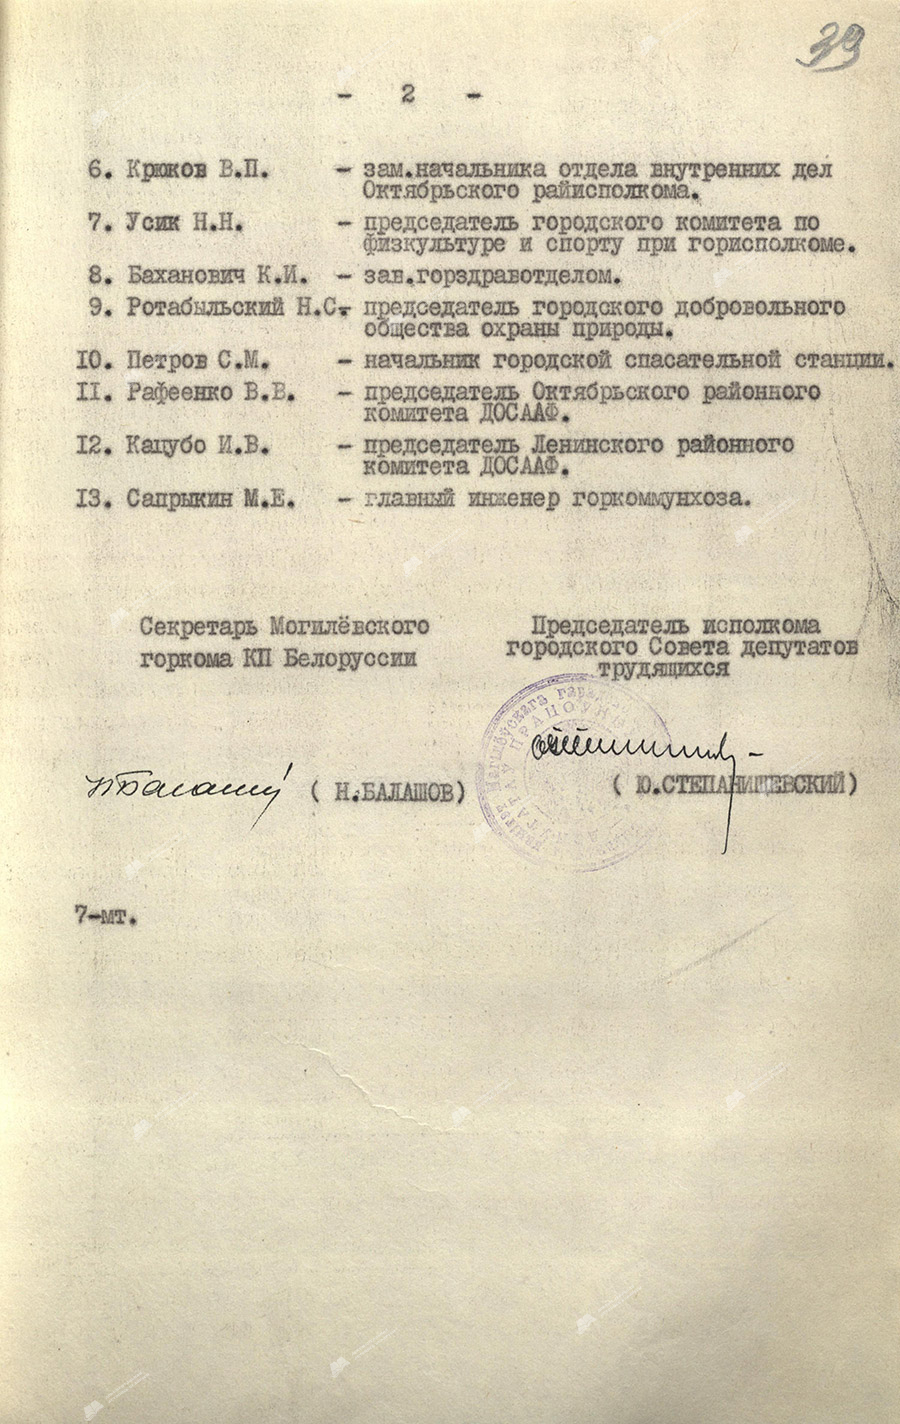 Resolution No. 209-40/3 of the Bureau of the City Committee of the Communist Party (Bolsheviks) of Belarus and the Executive Committee of the Mogilev City Council of Workers' Deputies on the organization of the Mogilev City Water Rescue Society-стр. 1